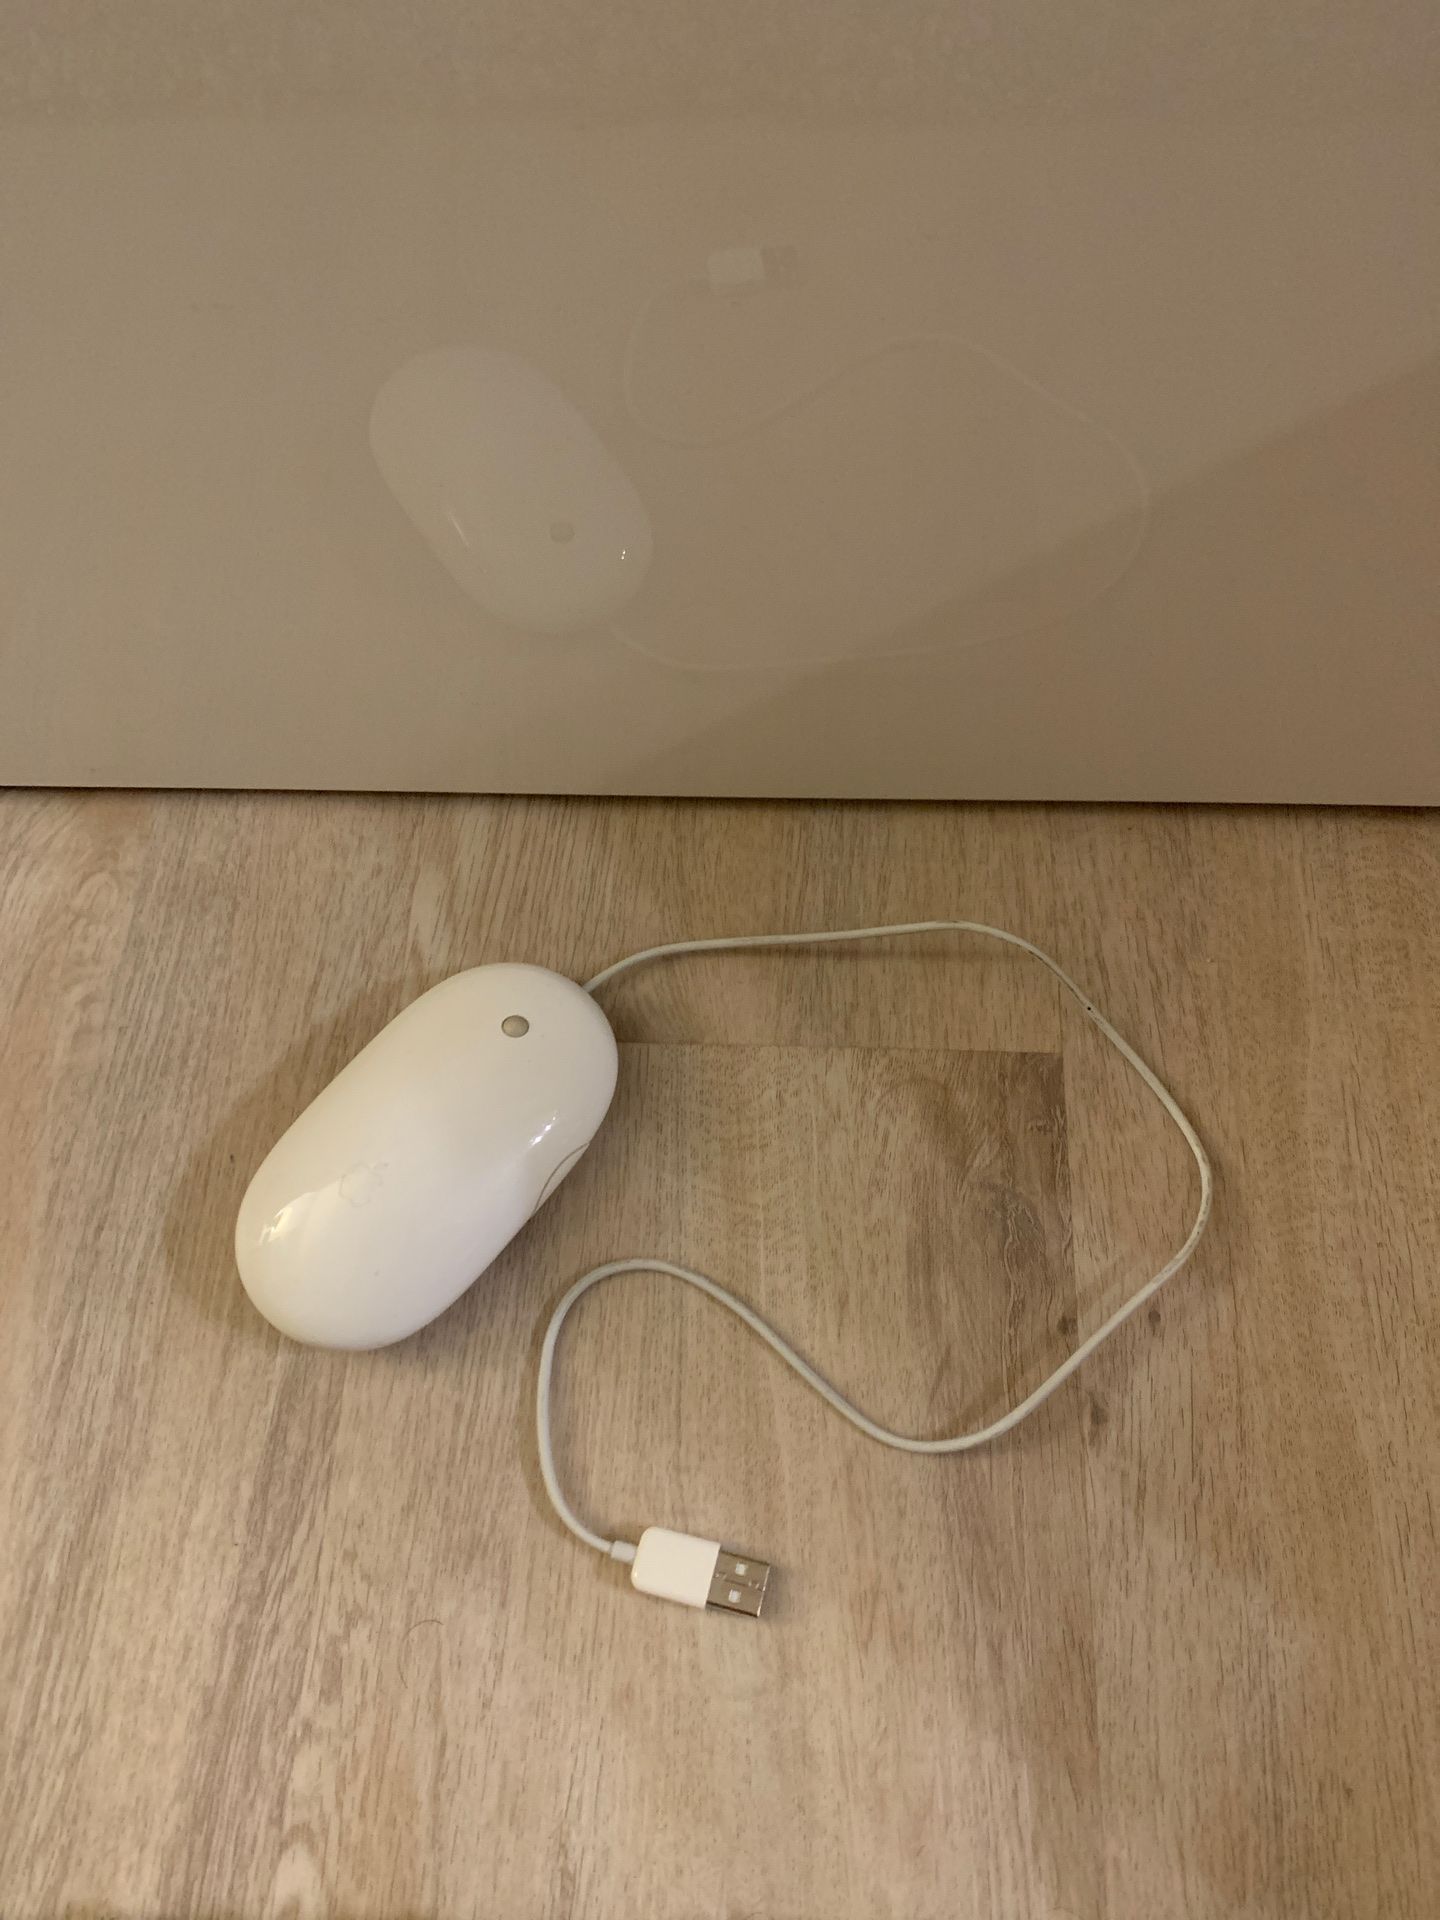 Apple mighty mouse (wired) (USB)